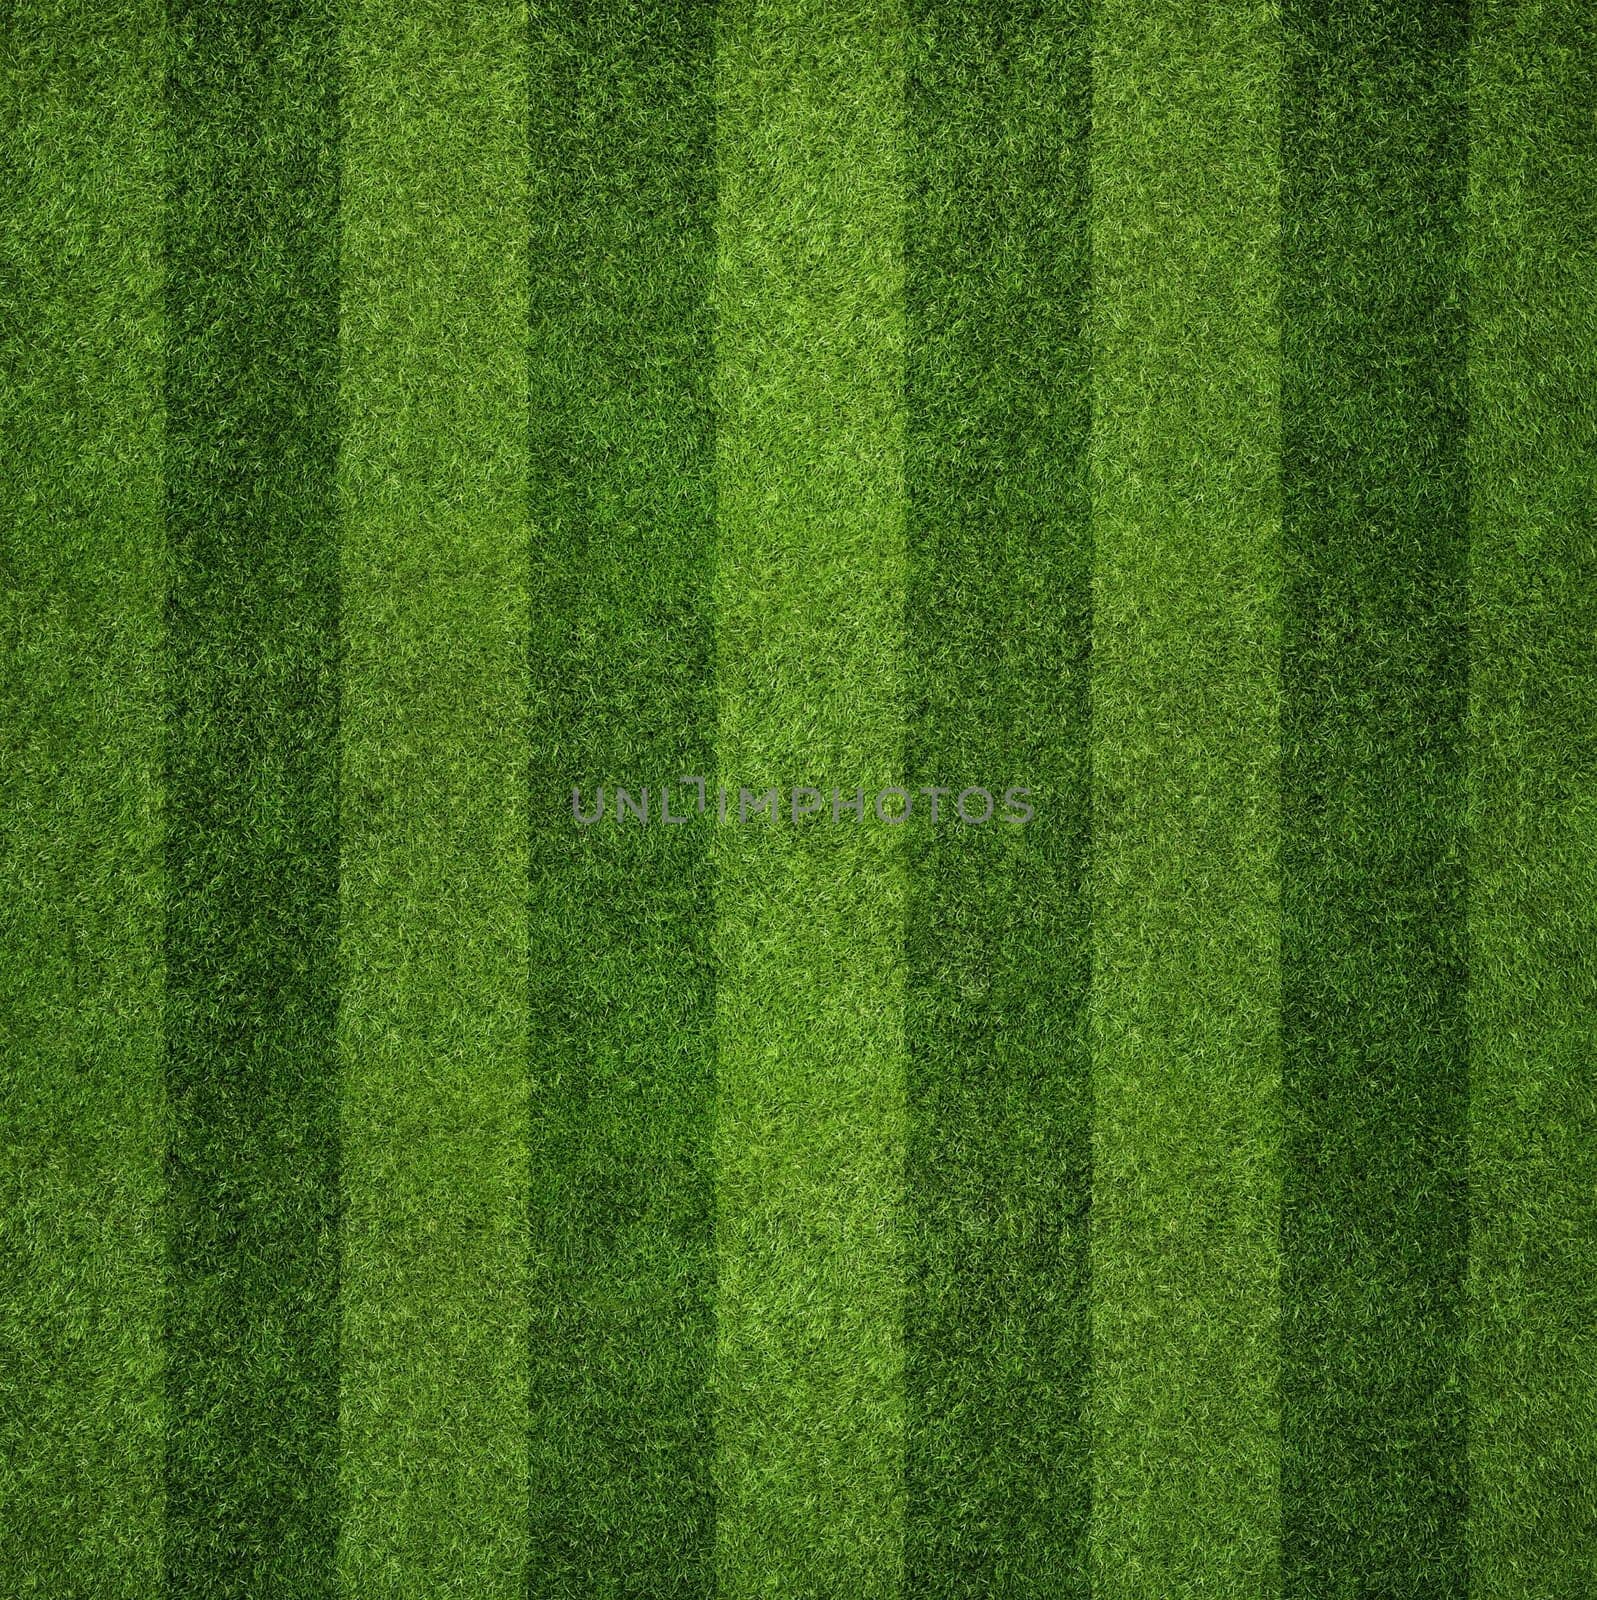 Short-cropped green grass with light and dark stripes